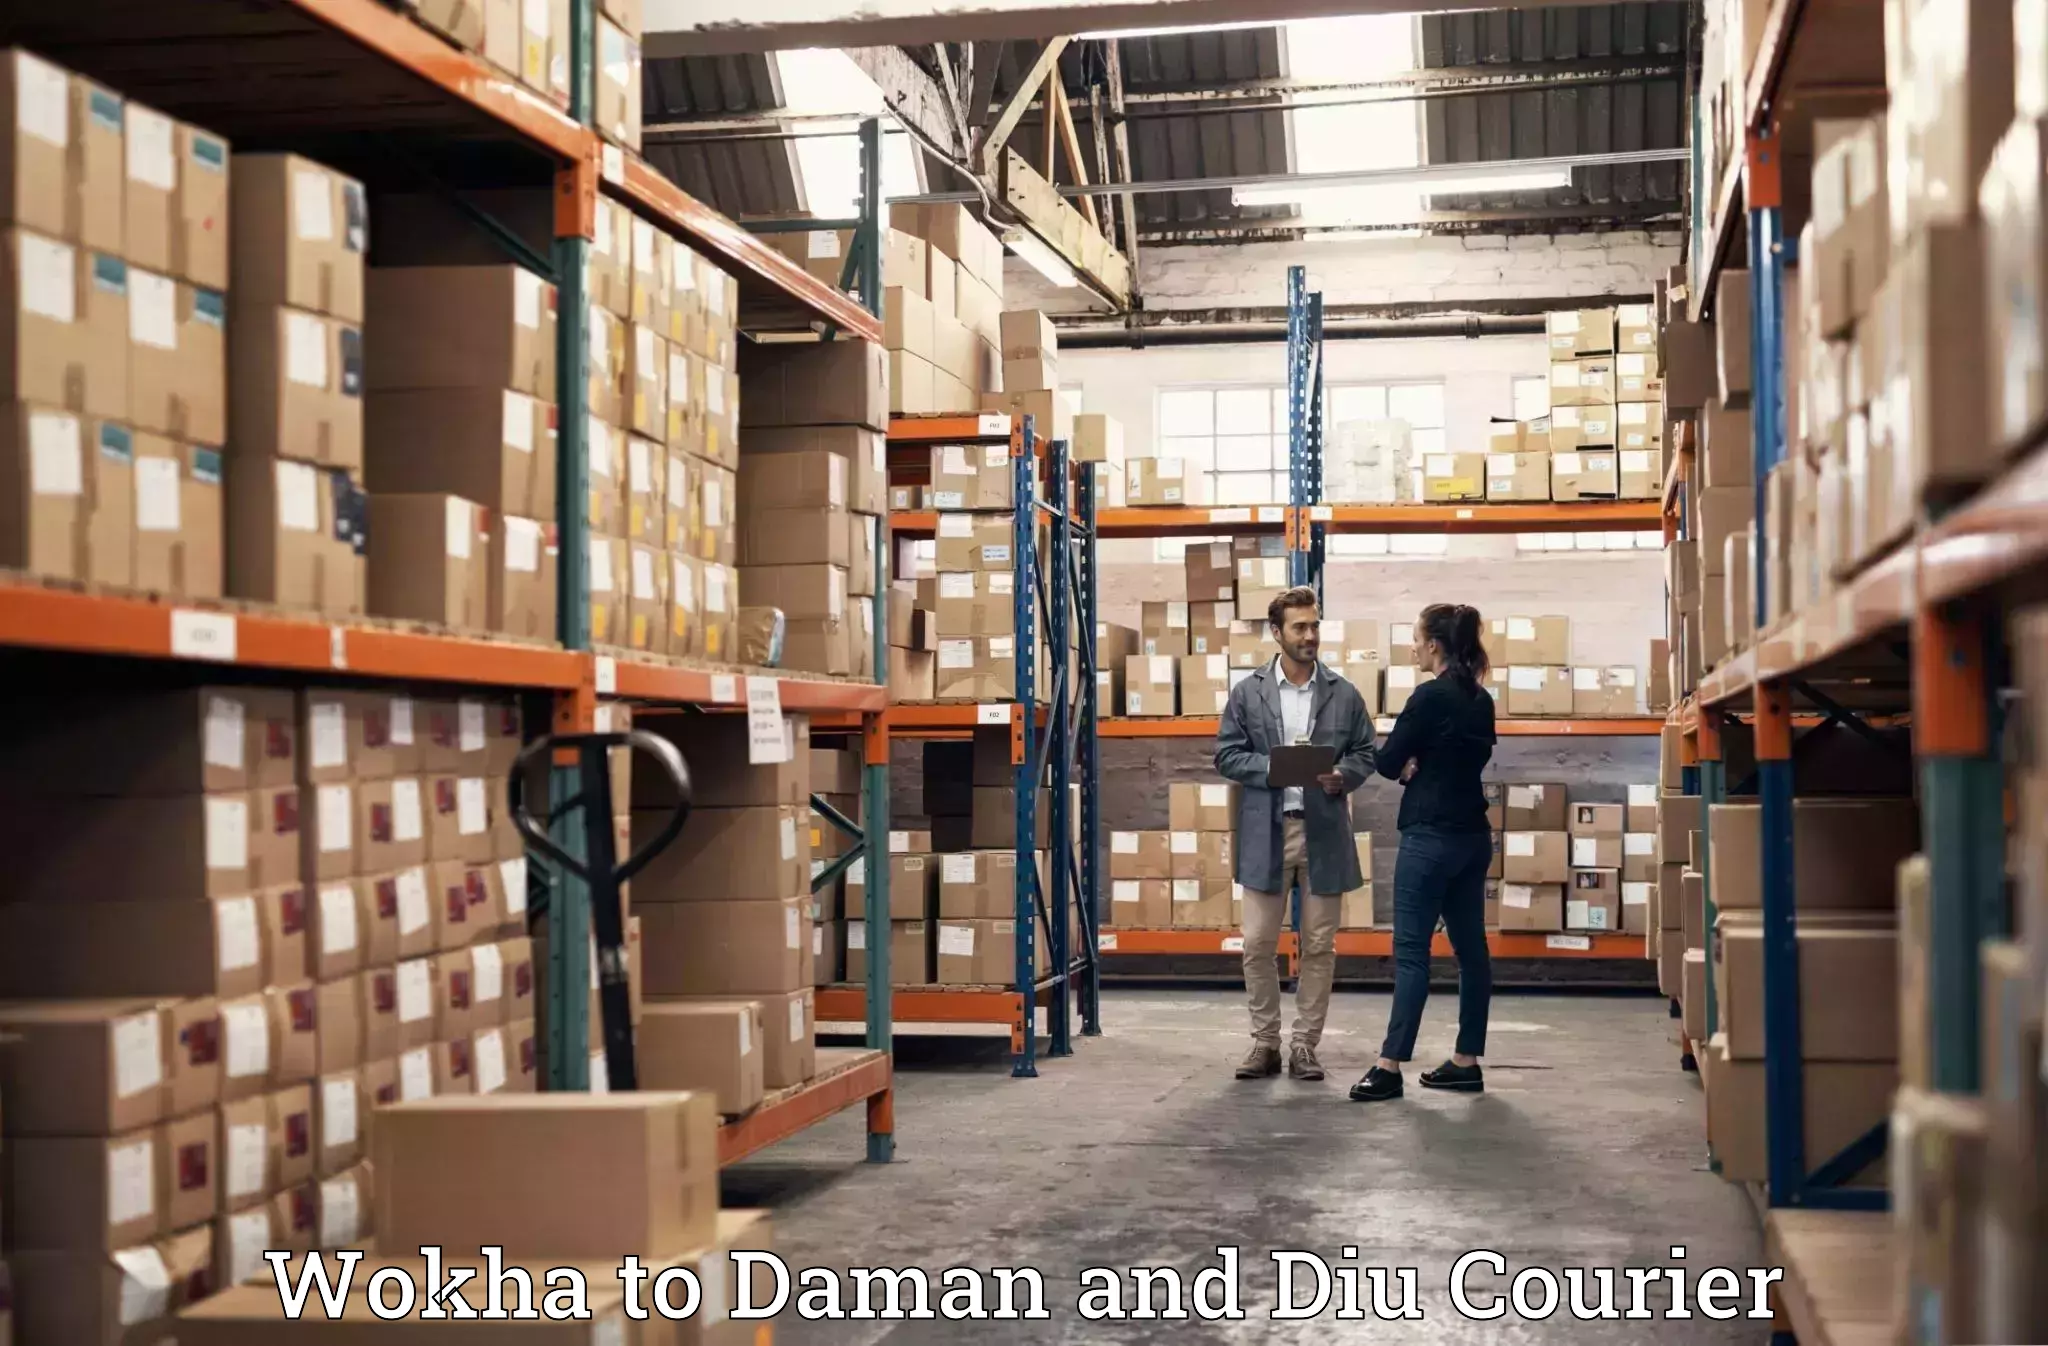 Dependable household movers Wokha to Daman and Diu